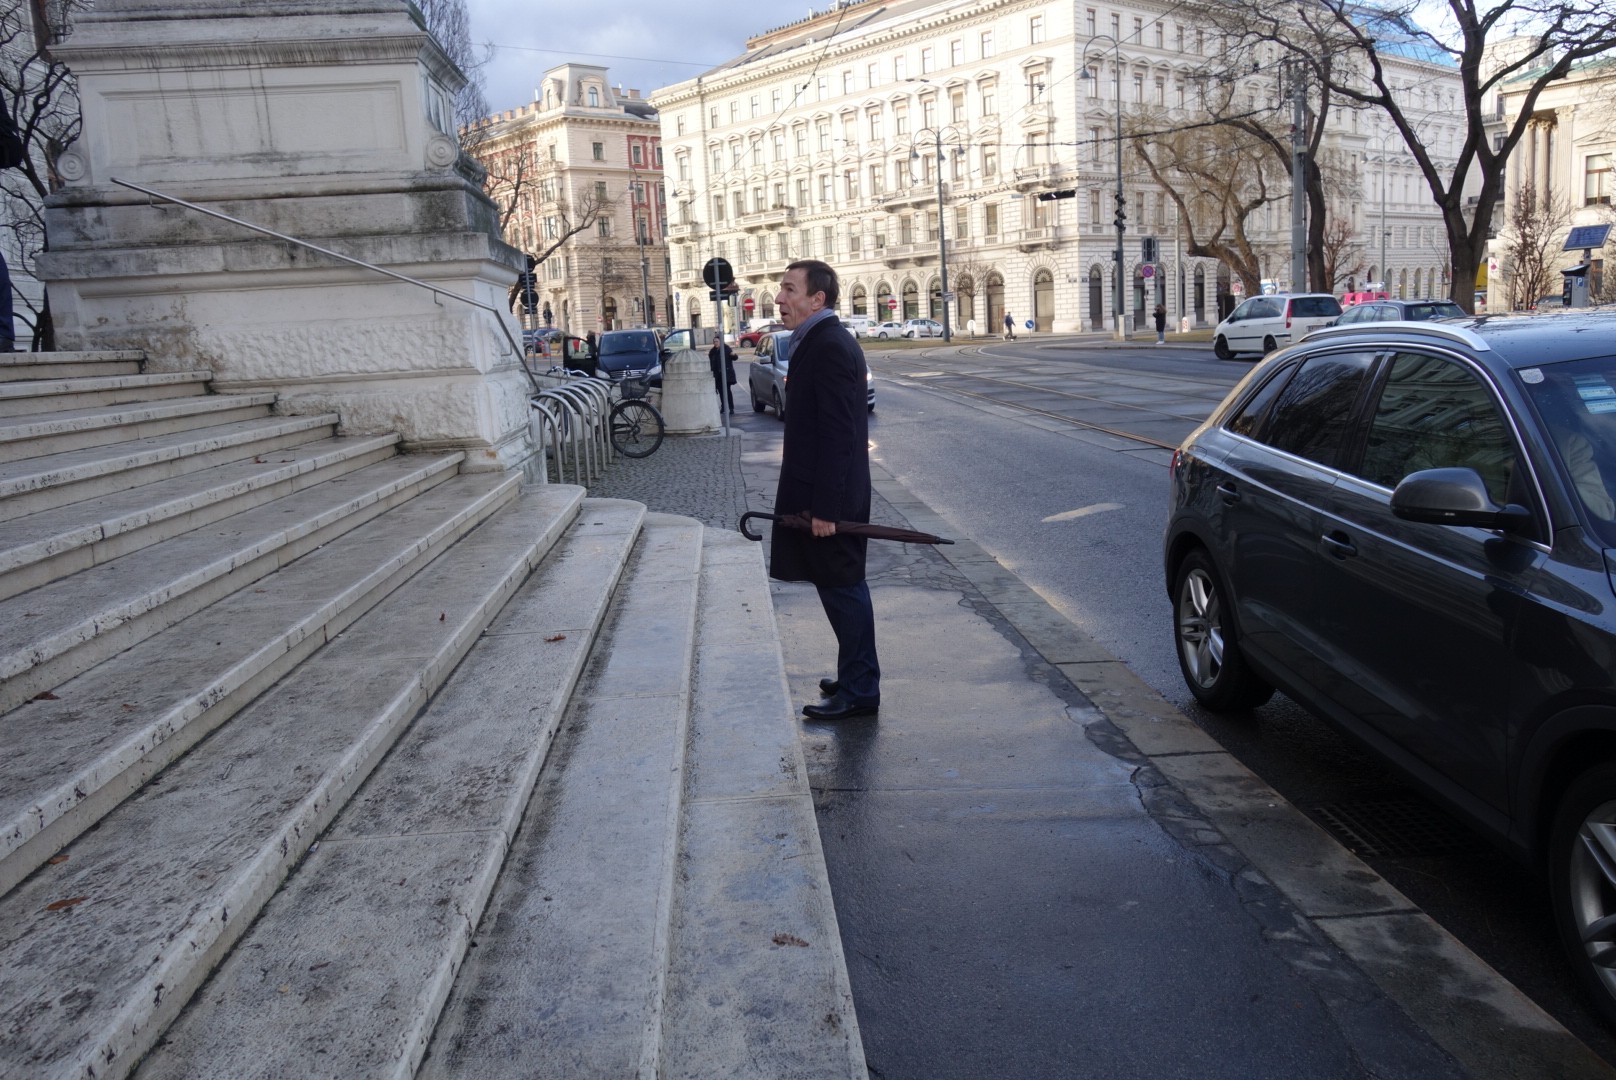 CEO of Group DF, Borys Krasnyansky, stands looking up at the courthouse moments after Austrian police arrested his boss Dmytro Firtash on Feb. 21.